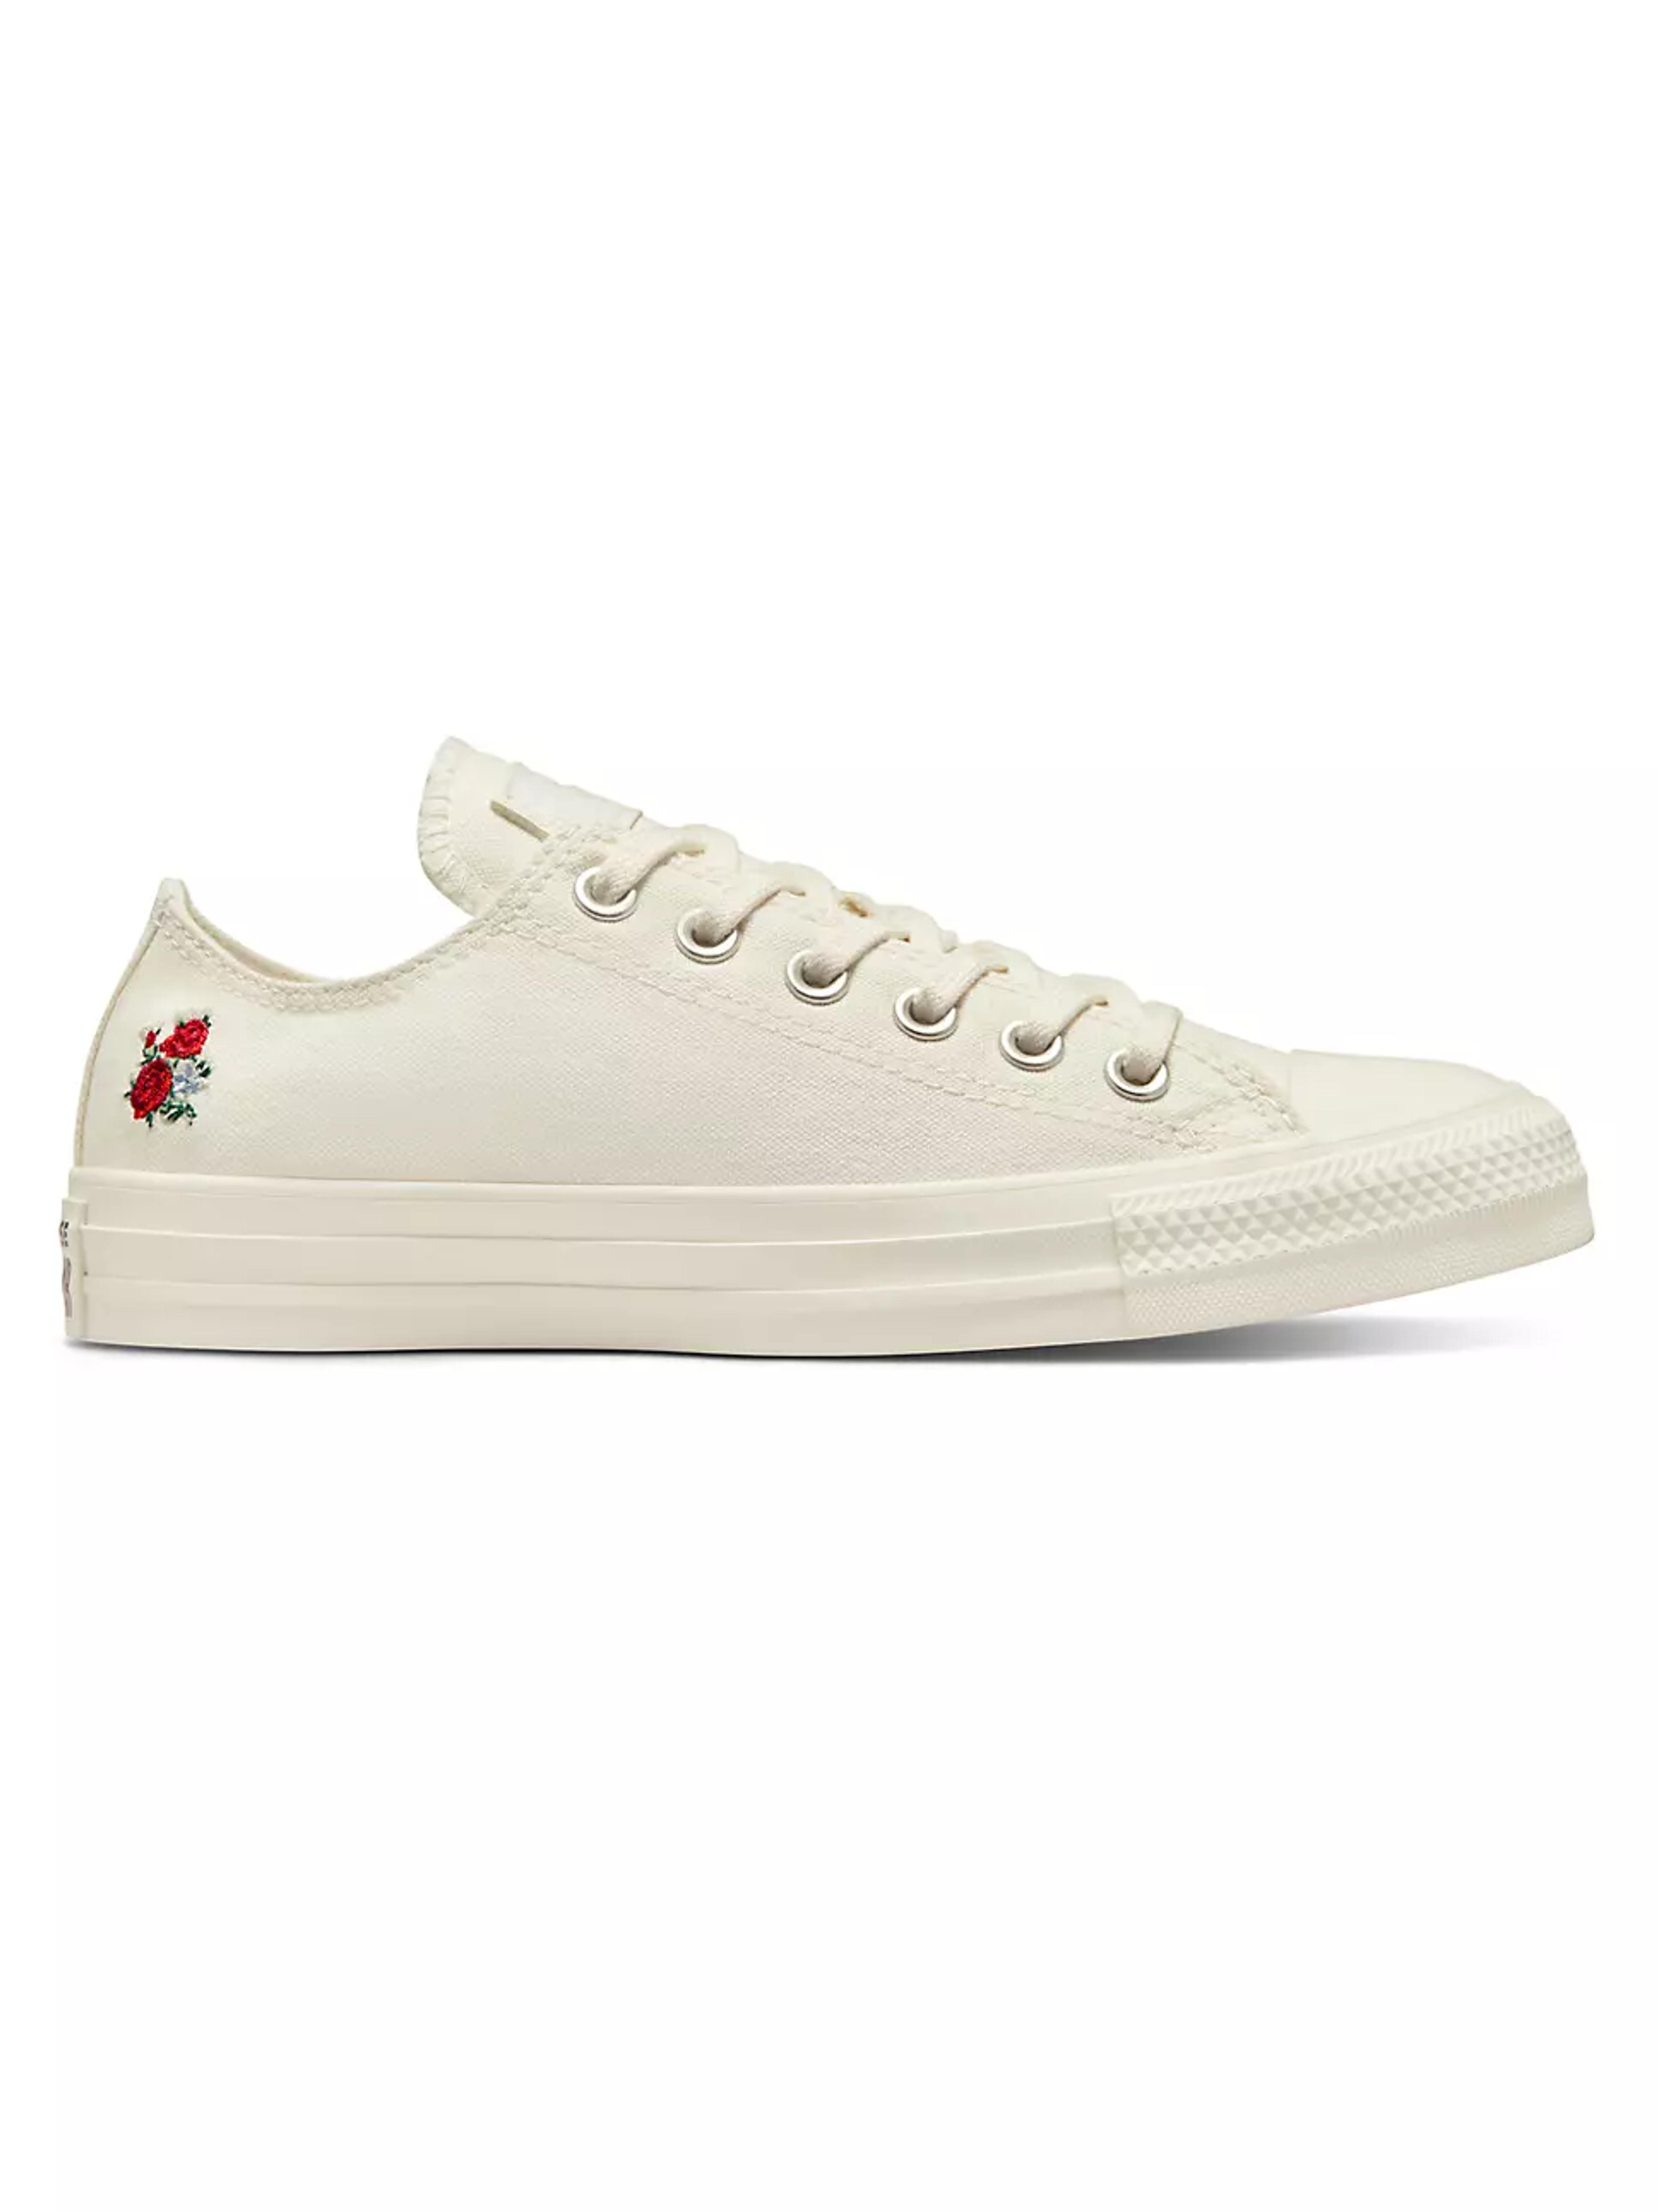 Shop Converse Chuck Taylor All Star Floral Sneakers | Saks Fifth Avenue